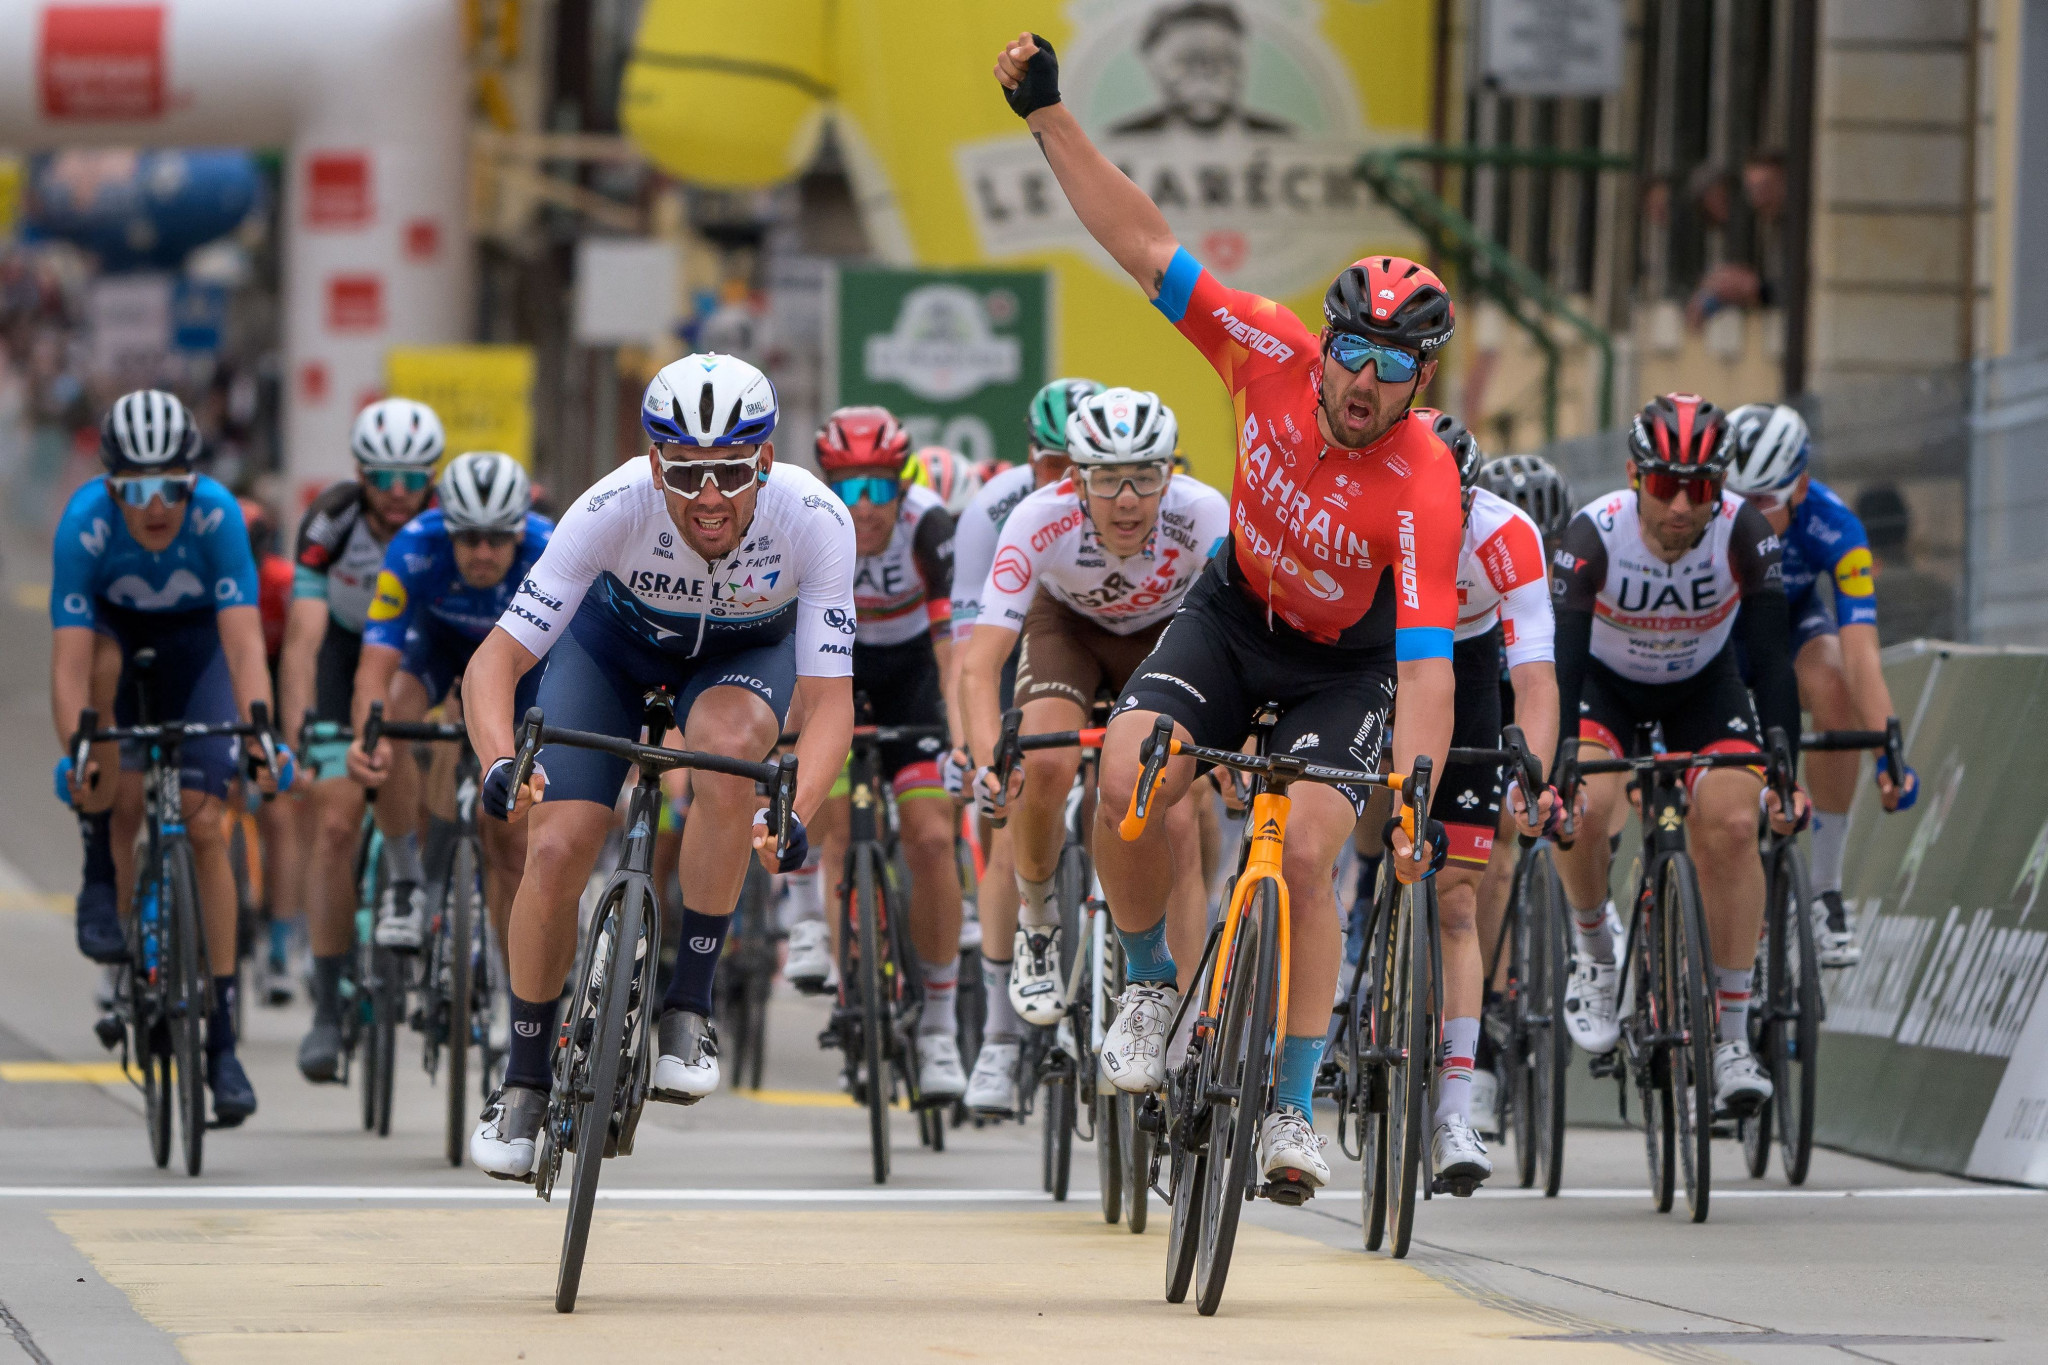 Colbrelli wins stage two of Tour de Romandie in reduced sprint finish